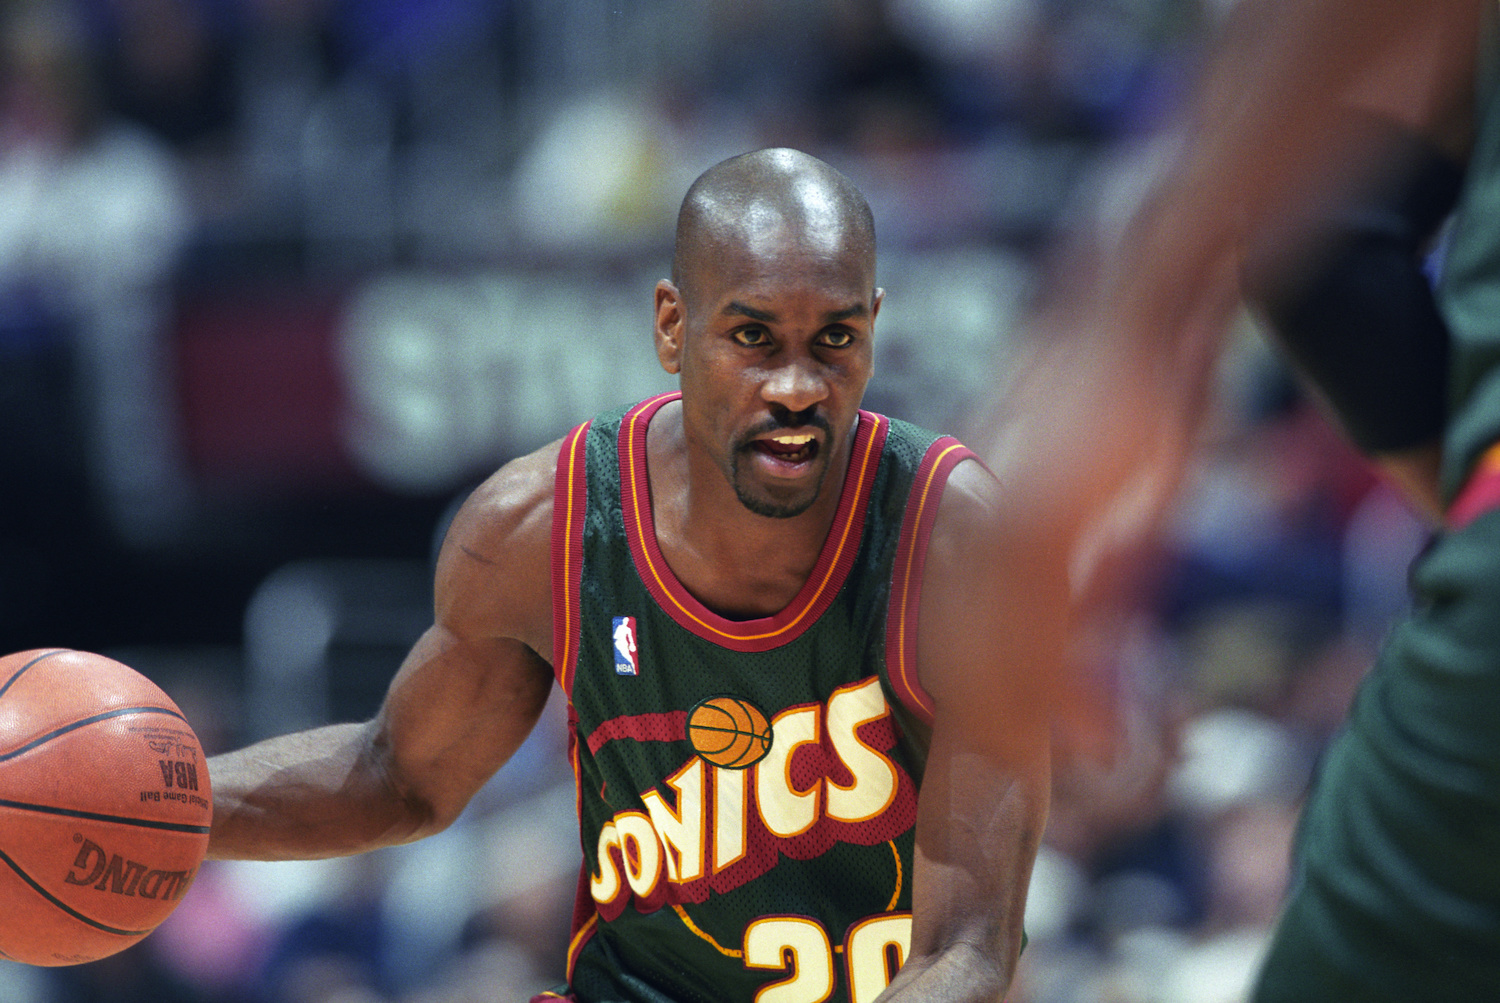 Gary Payton gets a deserved honor, but it would mean more at a Sonics game